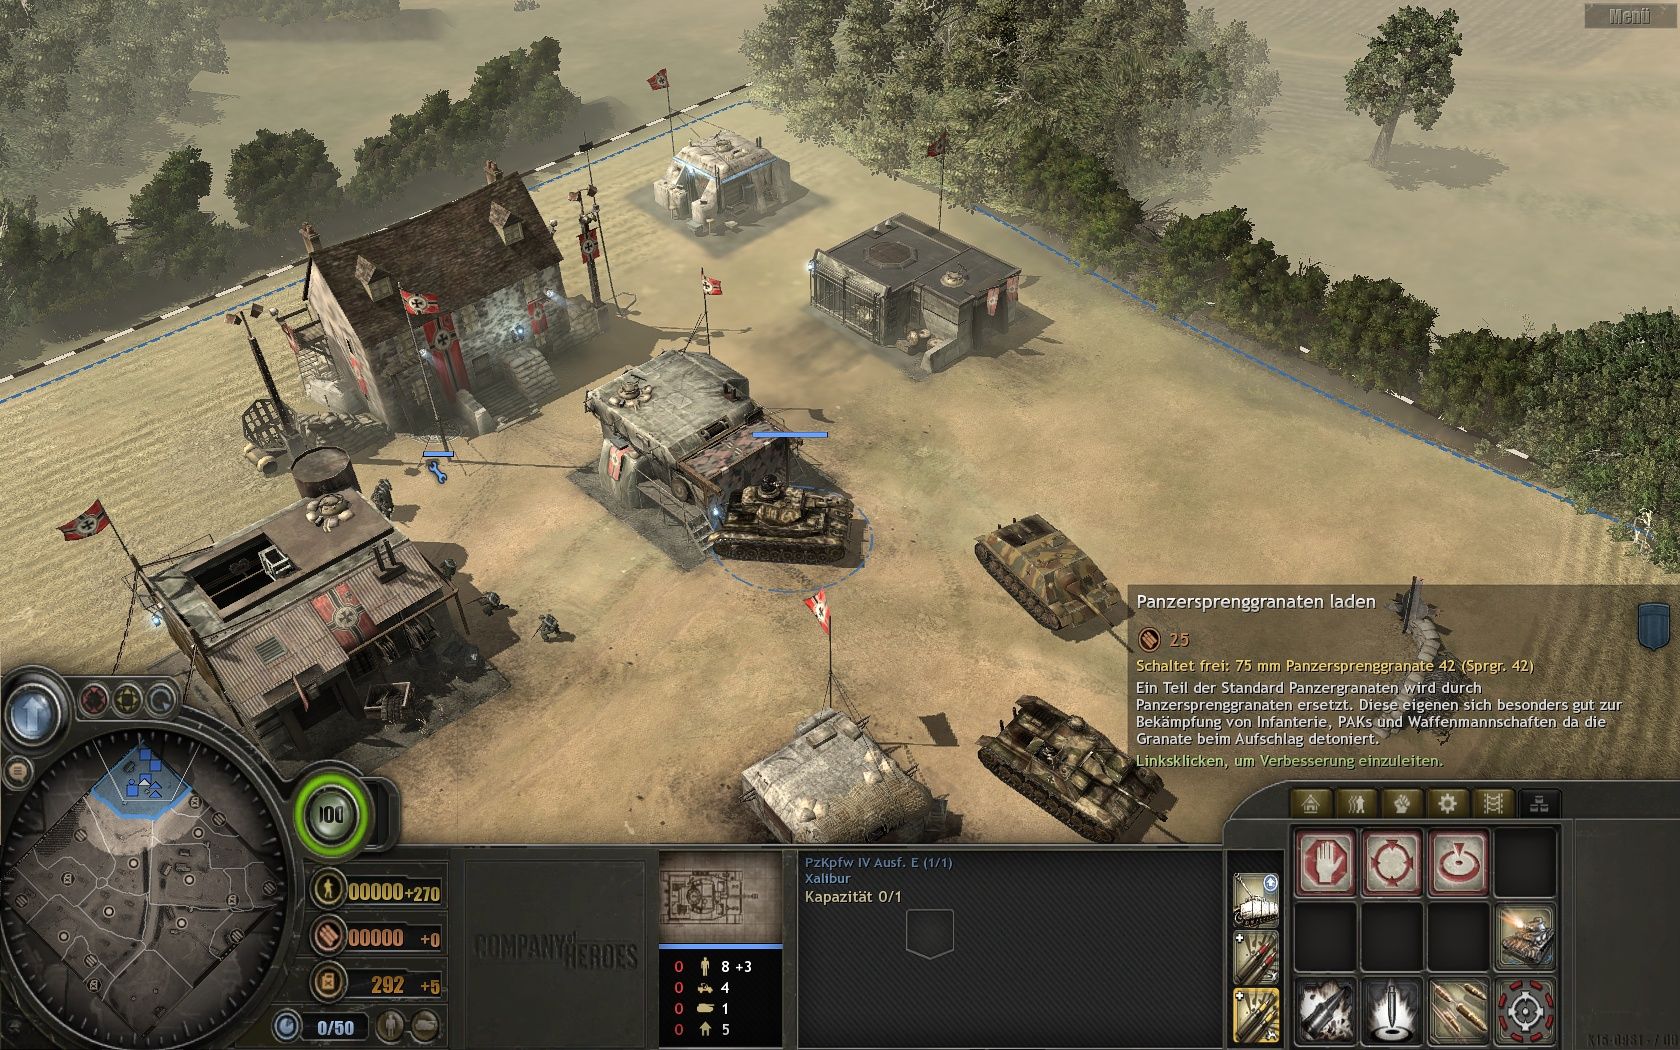 company of heroes 2 patch skirmish offline